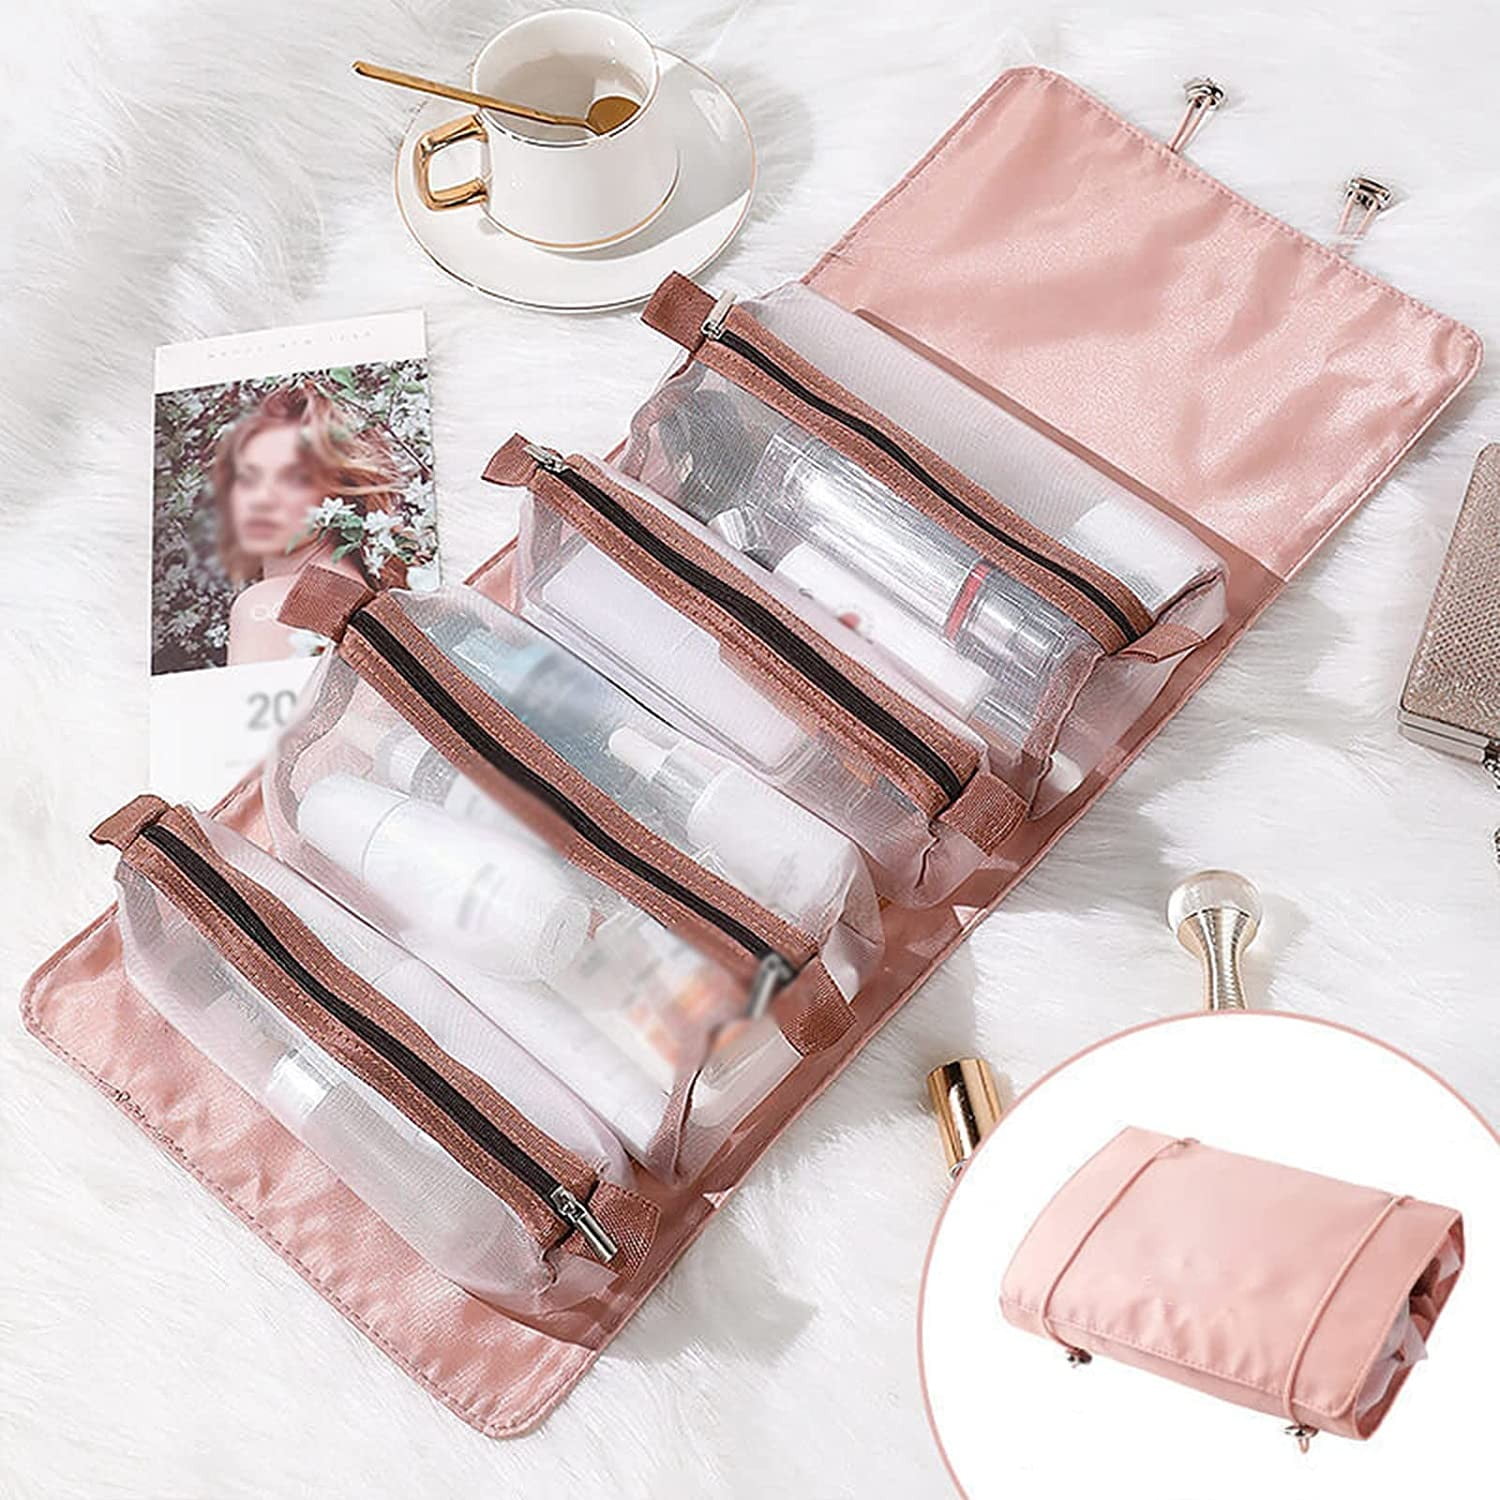 4-IN-1 Foldable Makeup Bags Set, Roll-up Compact Toiletry Bag Travel  Organizer, Four Detachable Compartments Quickly Organize Bags